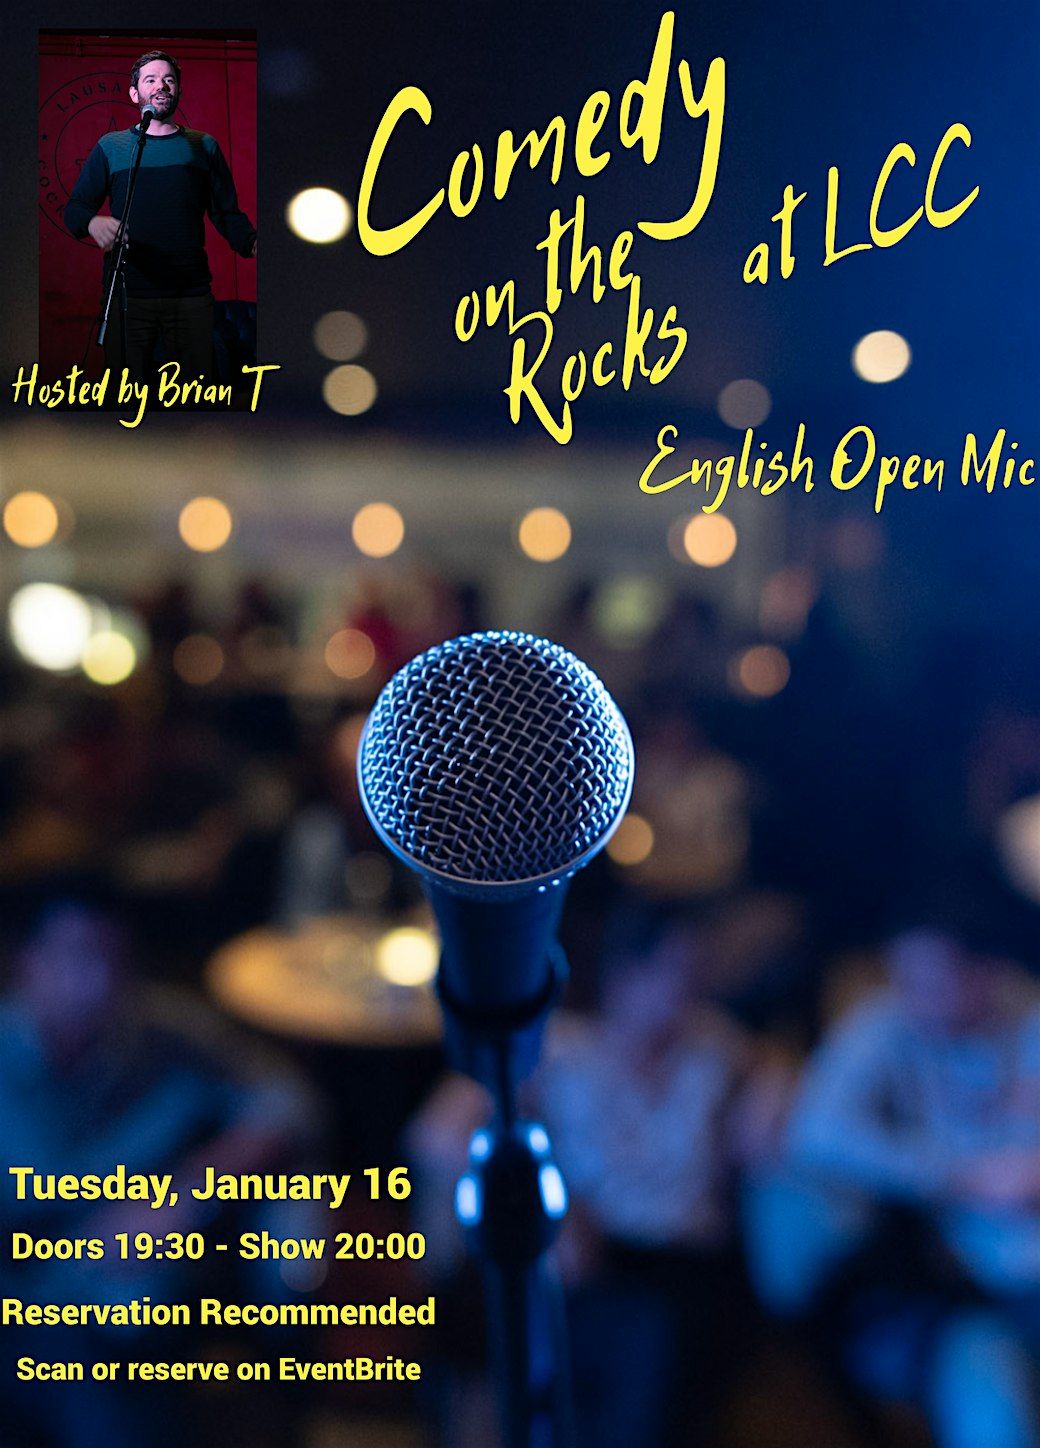 Comedy on the Rocks: English Open Mic